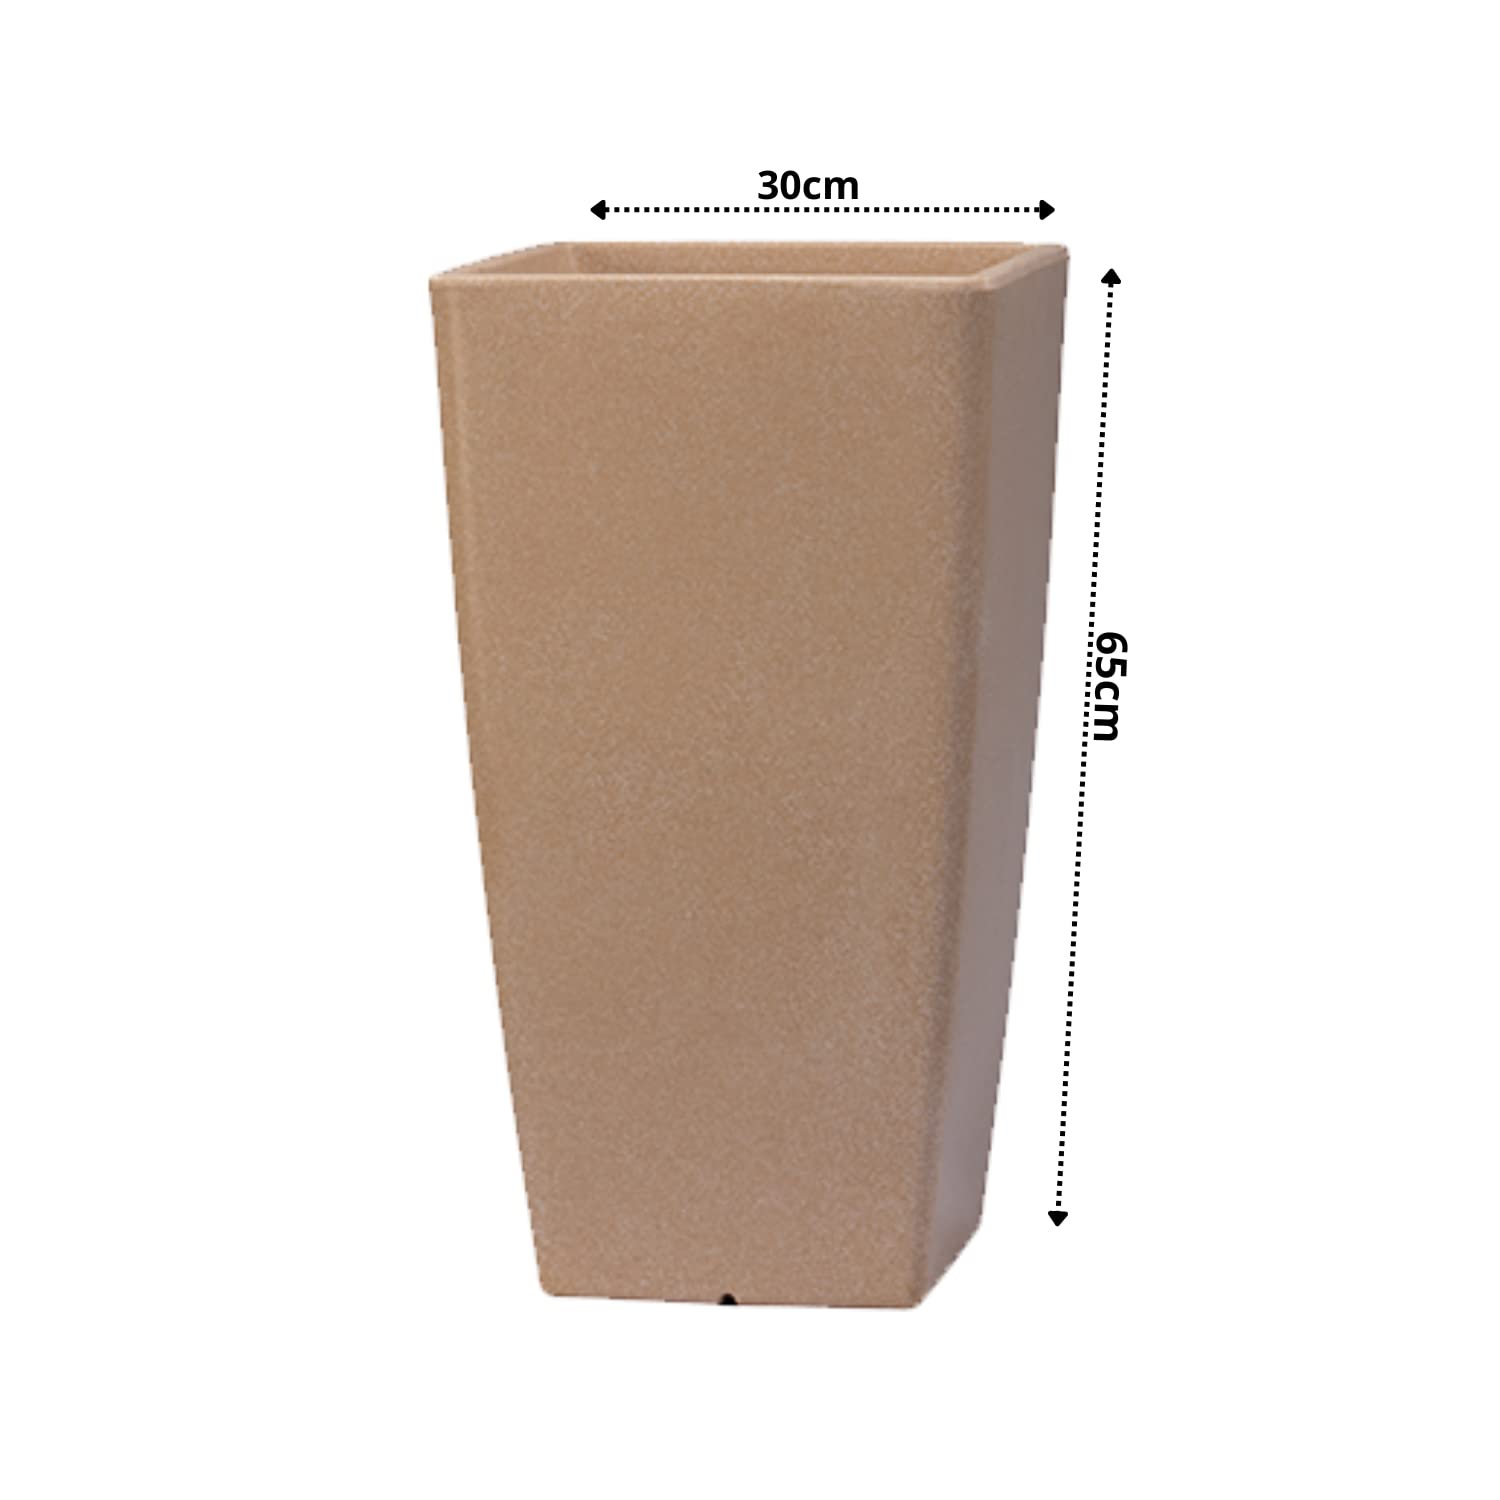 Hug A Plant | Paris 30CM Rotomolded Square Plastic Pot without Inner for Home & Garden (33CM | 11.8 INCH, Square, Cream Stone Finish)